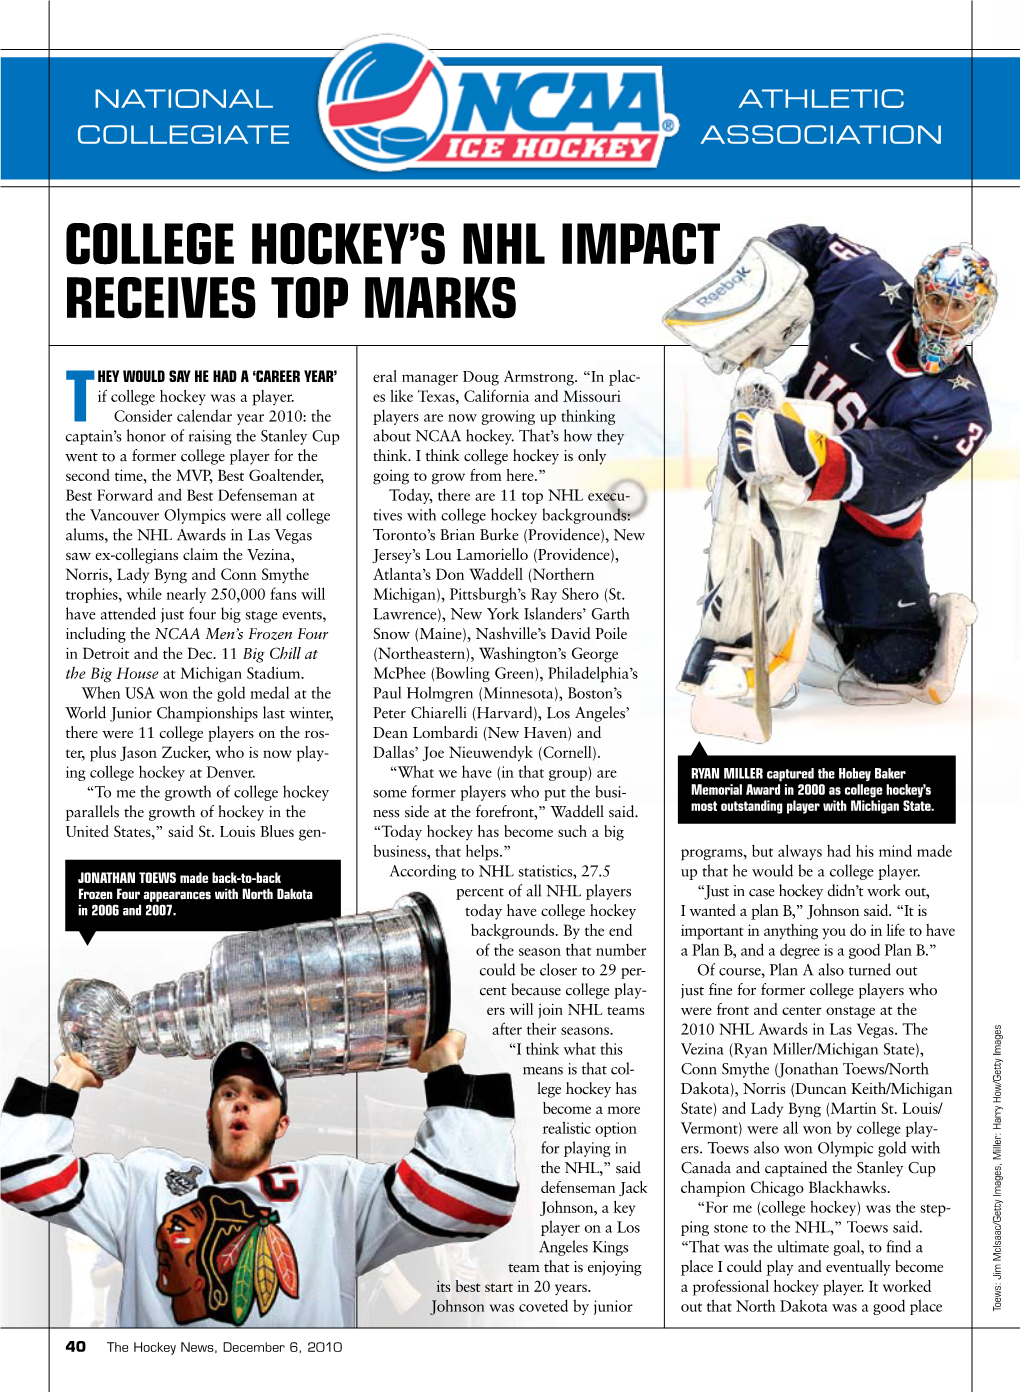 College Hockey's Nhl Impact Receives Top Marks